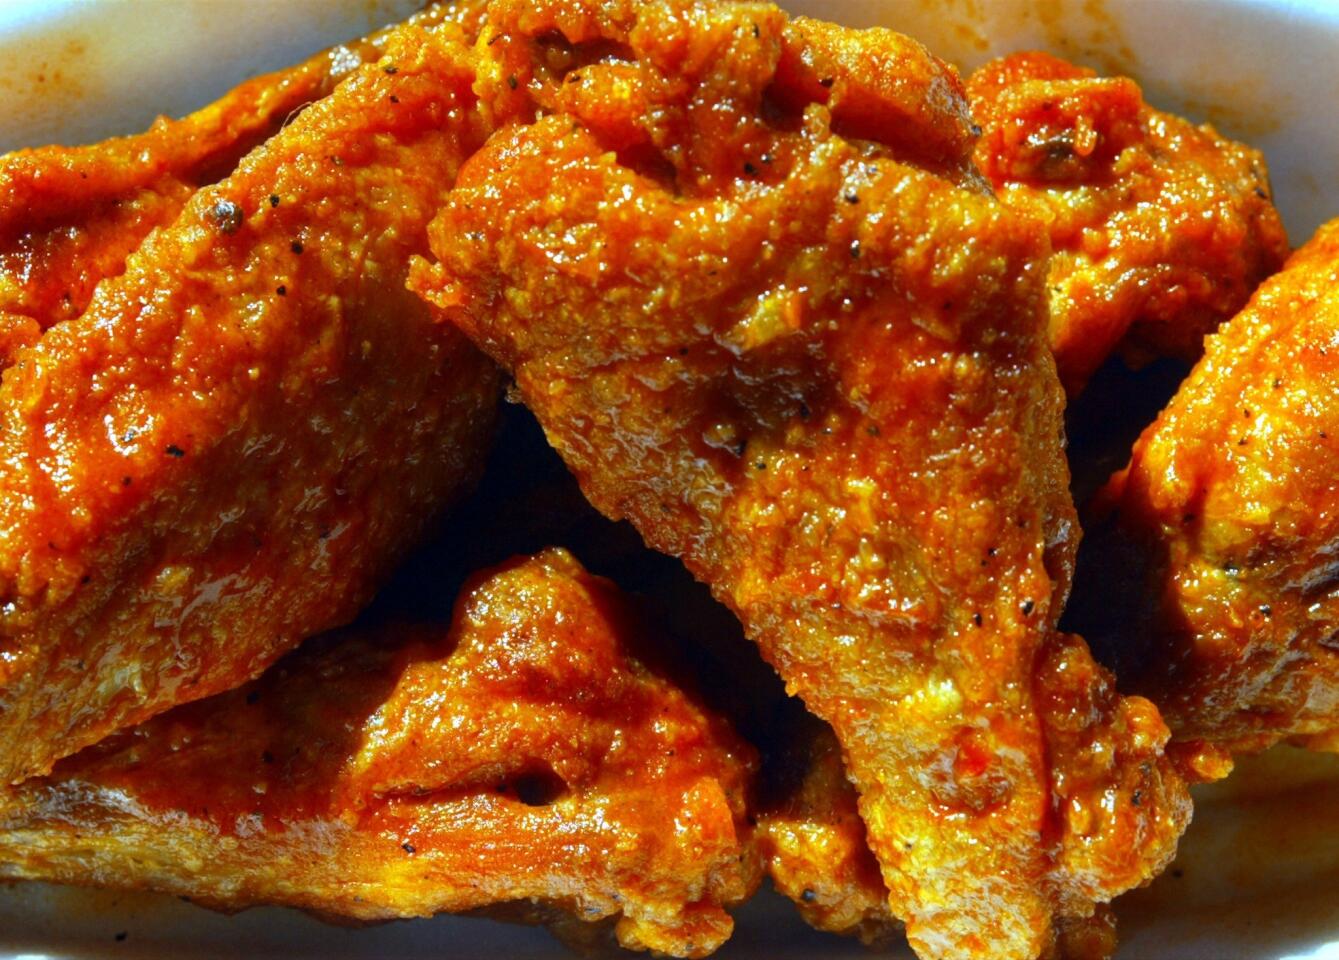 On the snack table, the hot Buffalo chicken wings can out-shout the party music. Talk about needy.